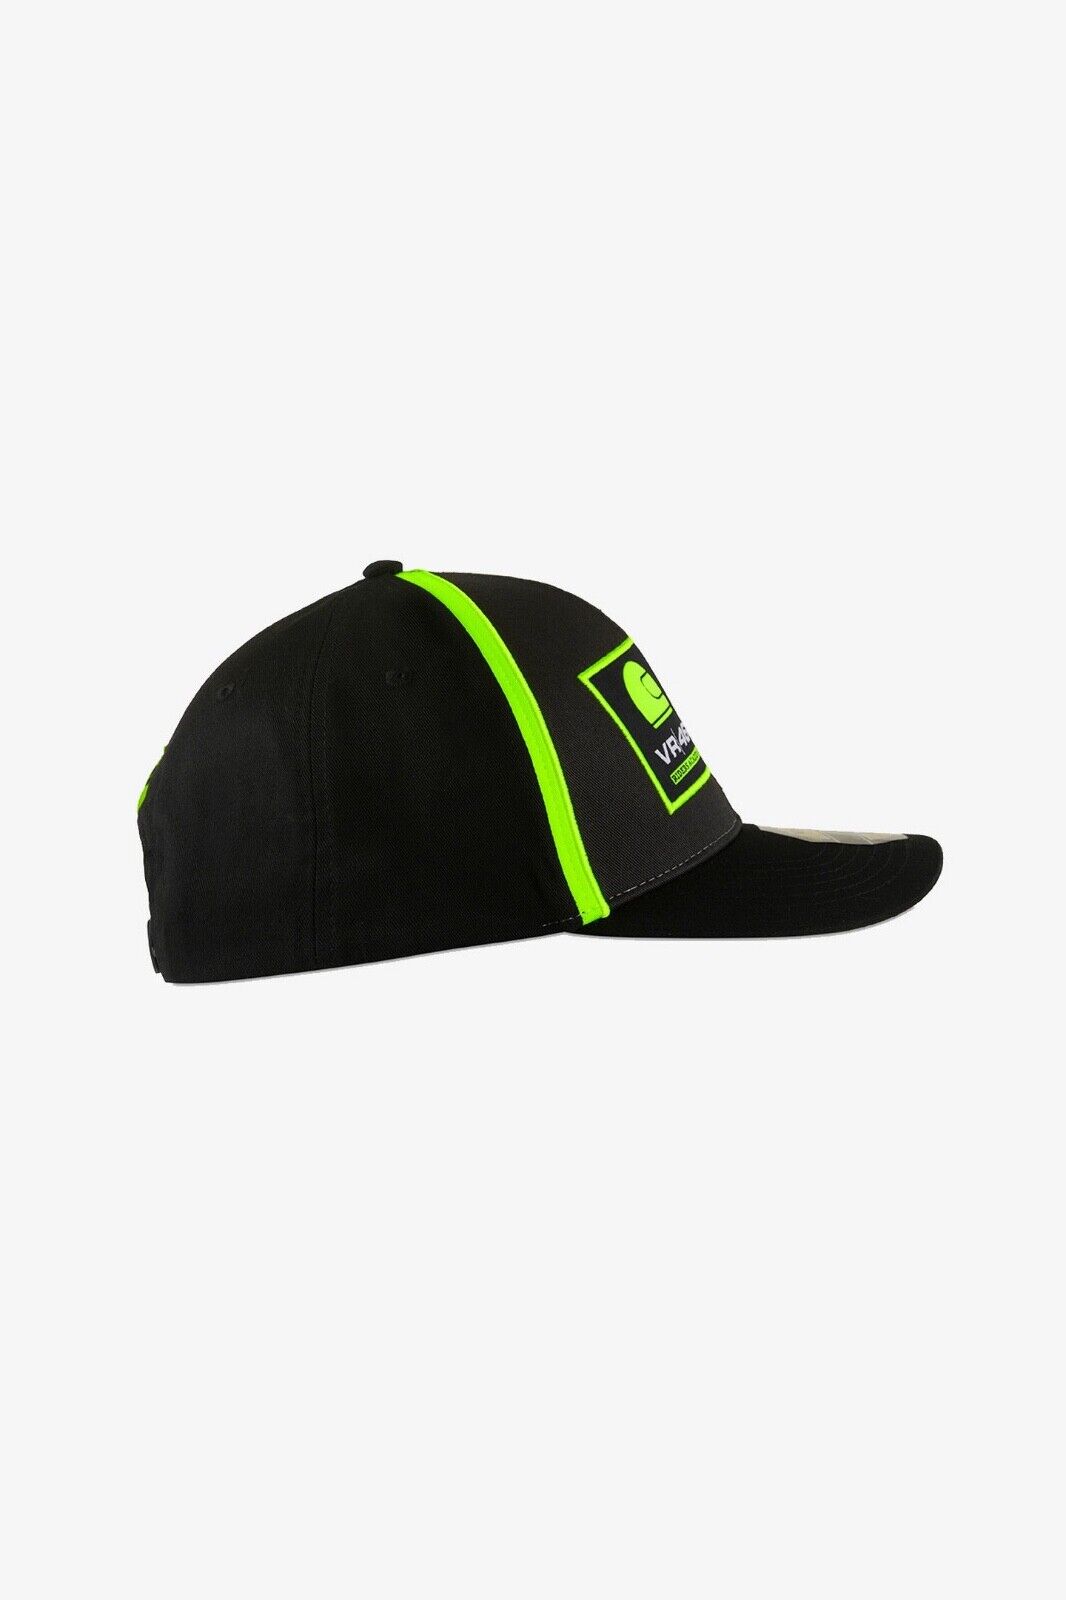 Official Valentino Rossi VR46 Monster Academy Cap - Mrmca 398303